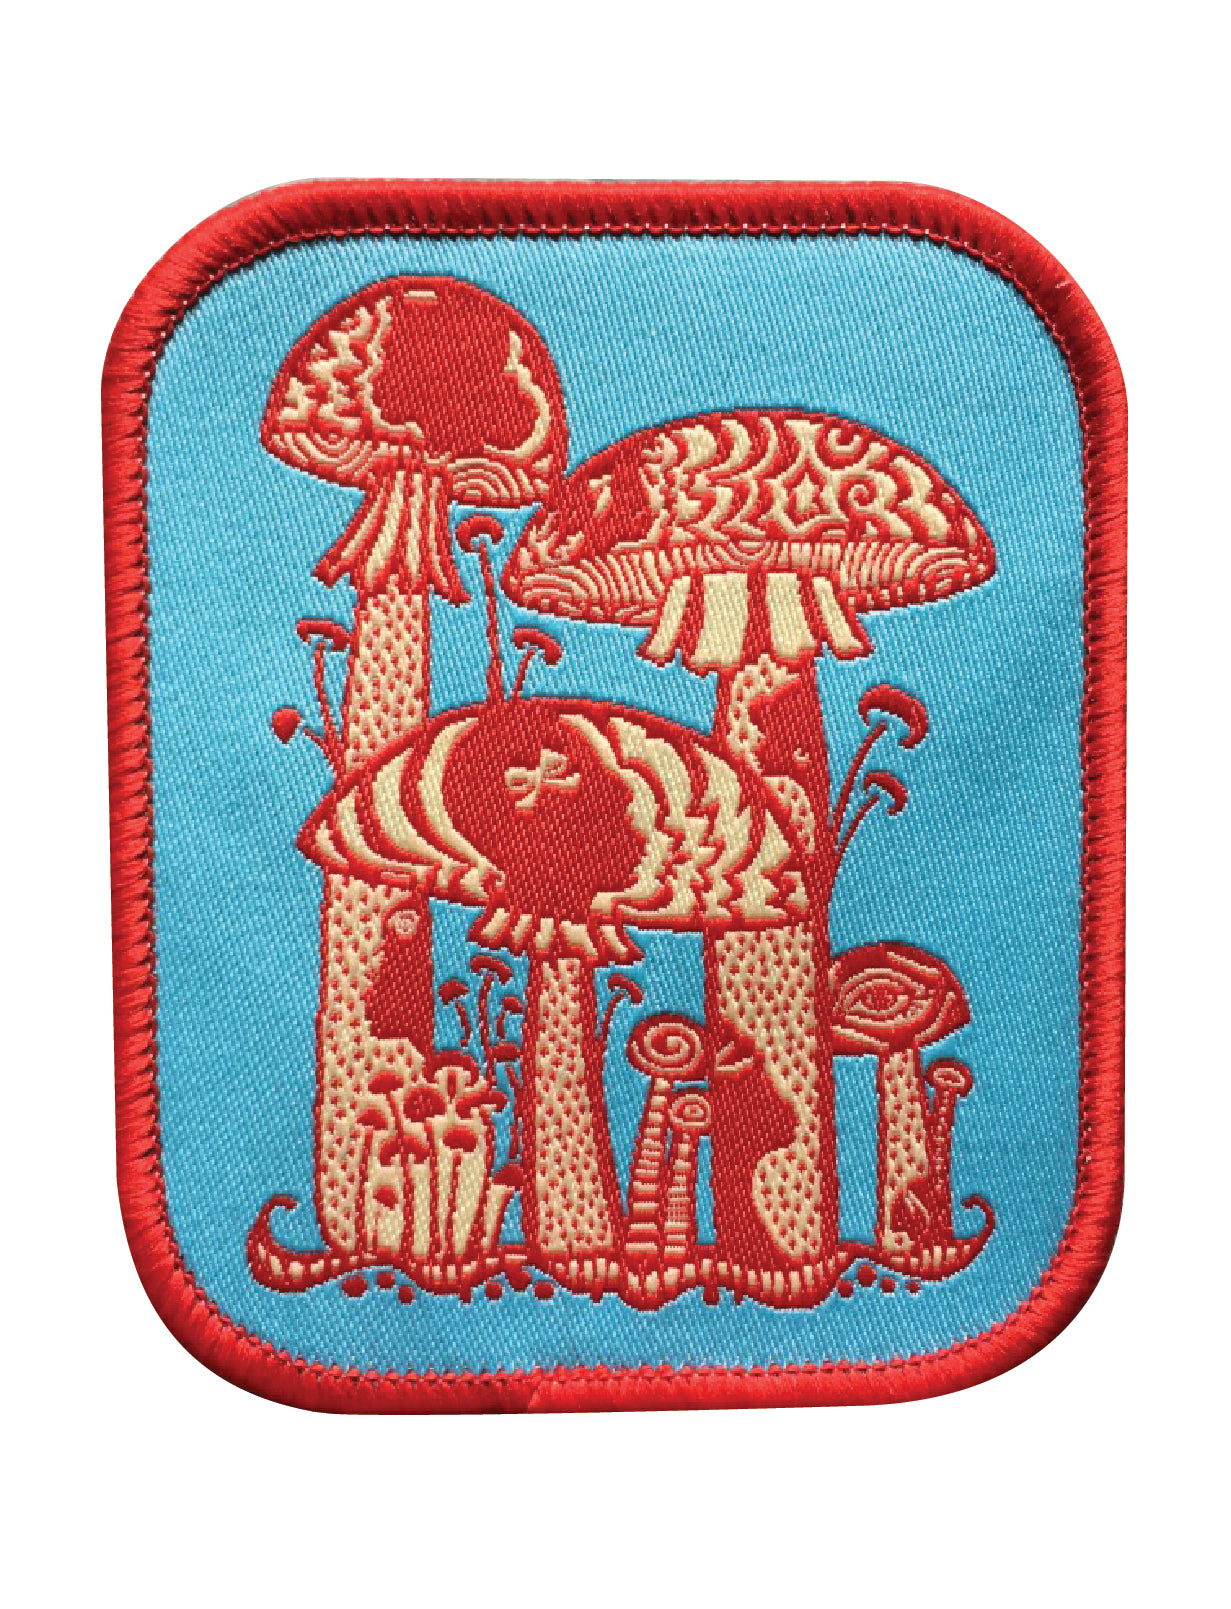 Rectangular aqua, red and off white psychedelic mushroom iron on patch